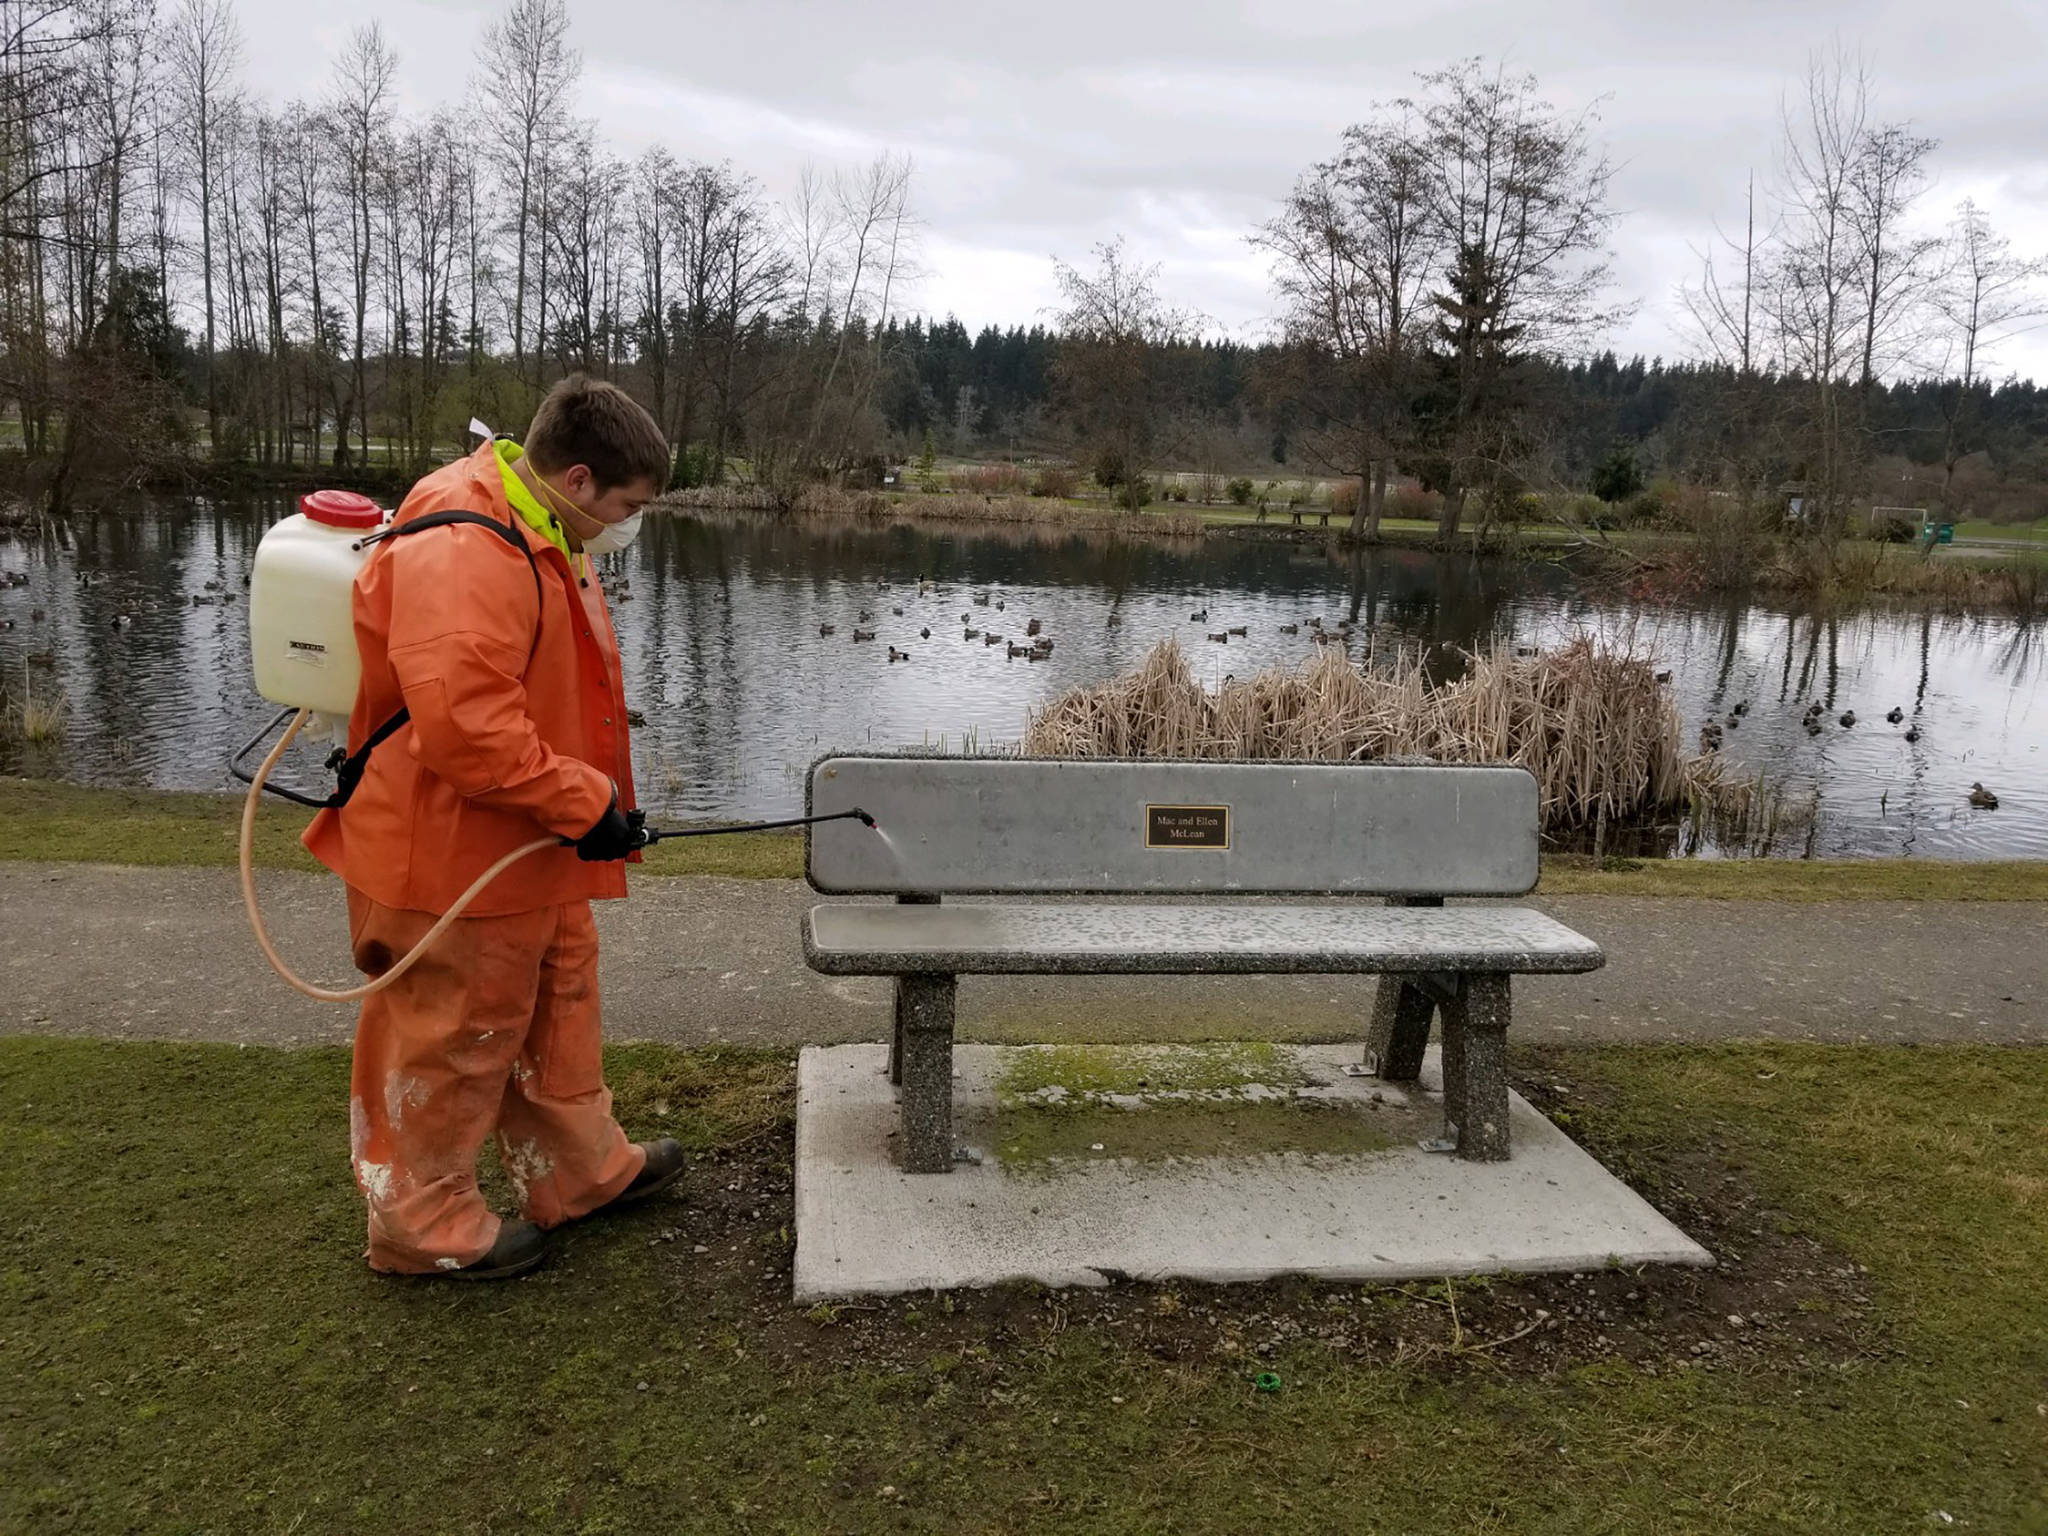 Michael Latimer, a City of Sequim Public Works crew member sanitizes a city bench. Photo courtesy of City of Sequim